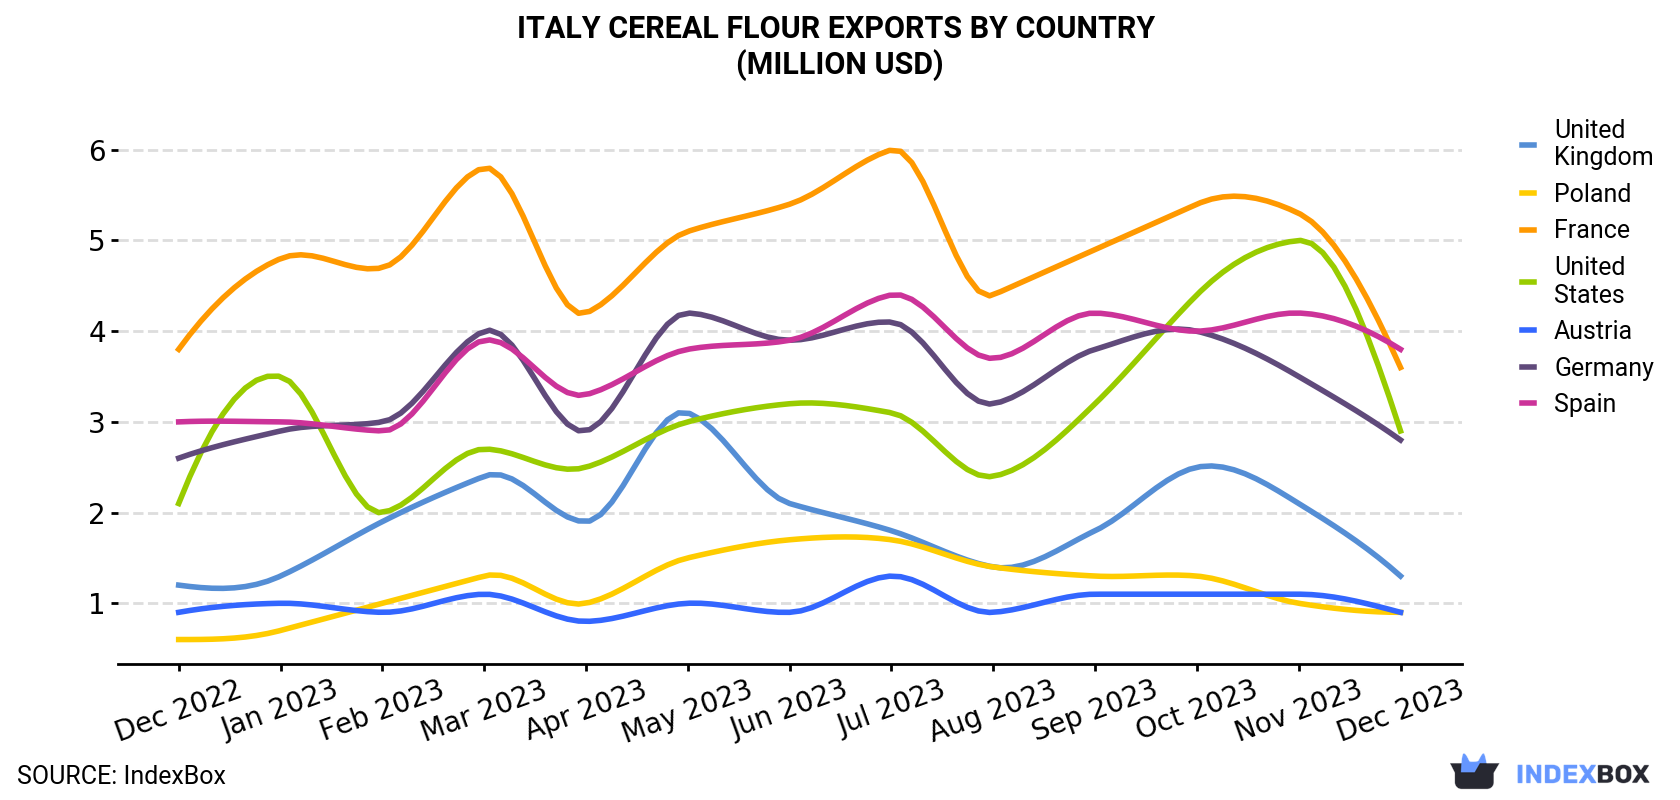 Italy Cereal Flour Exports By Country (Million USD)